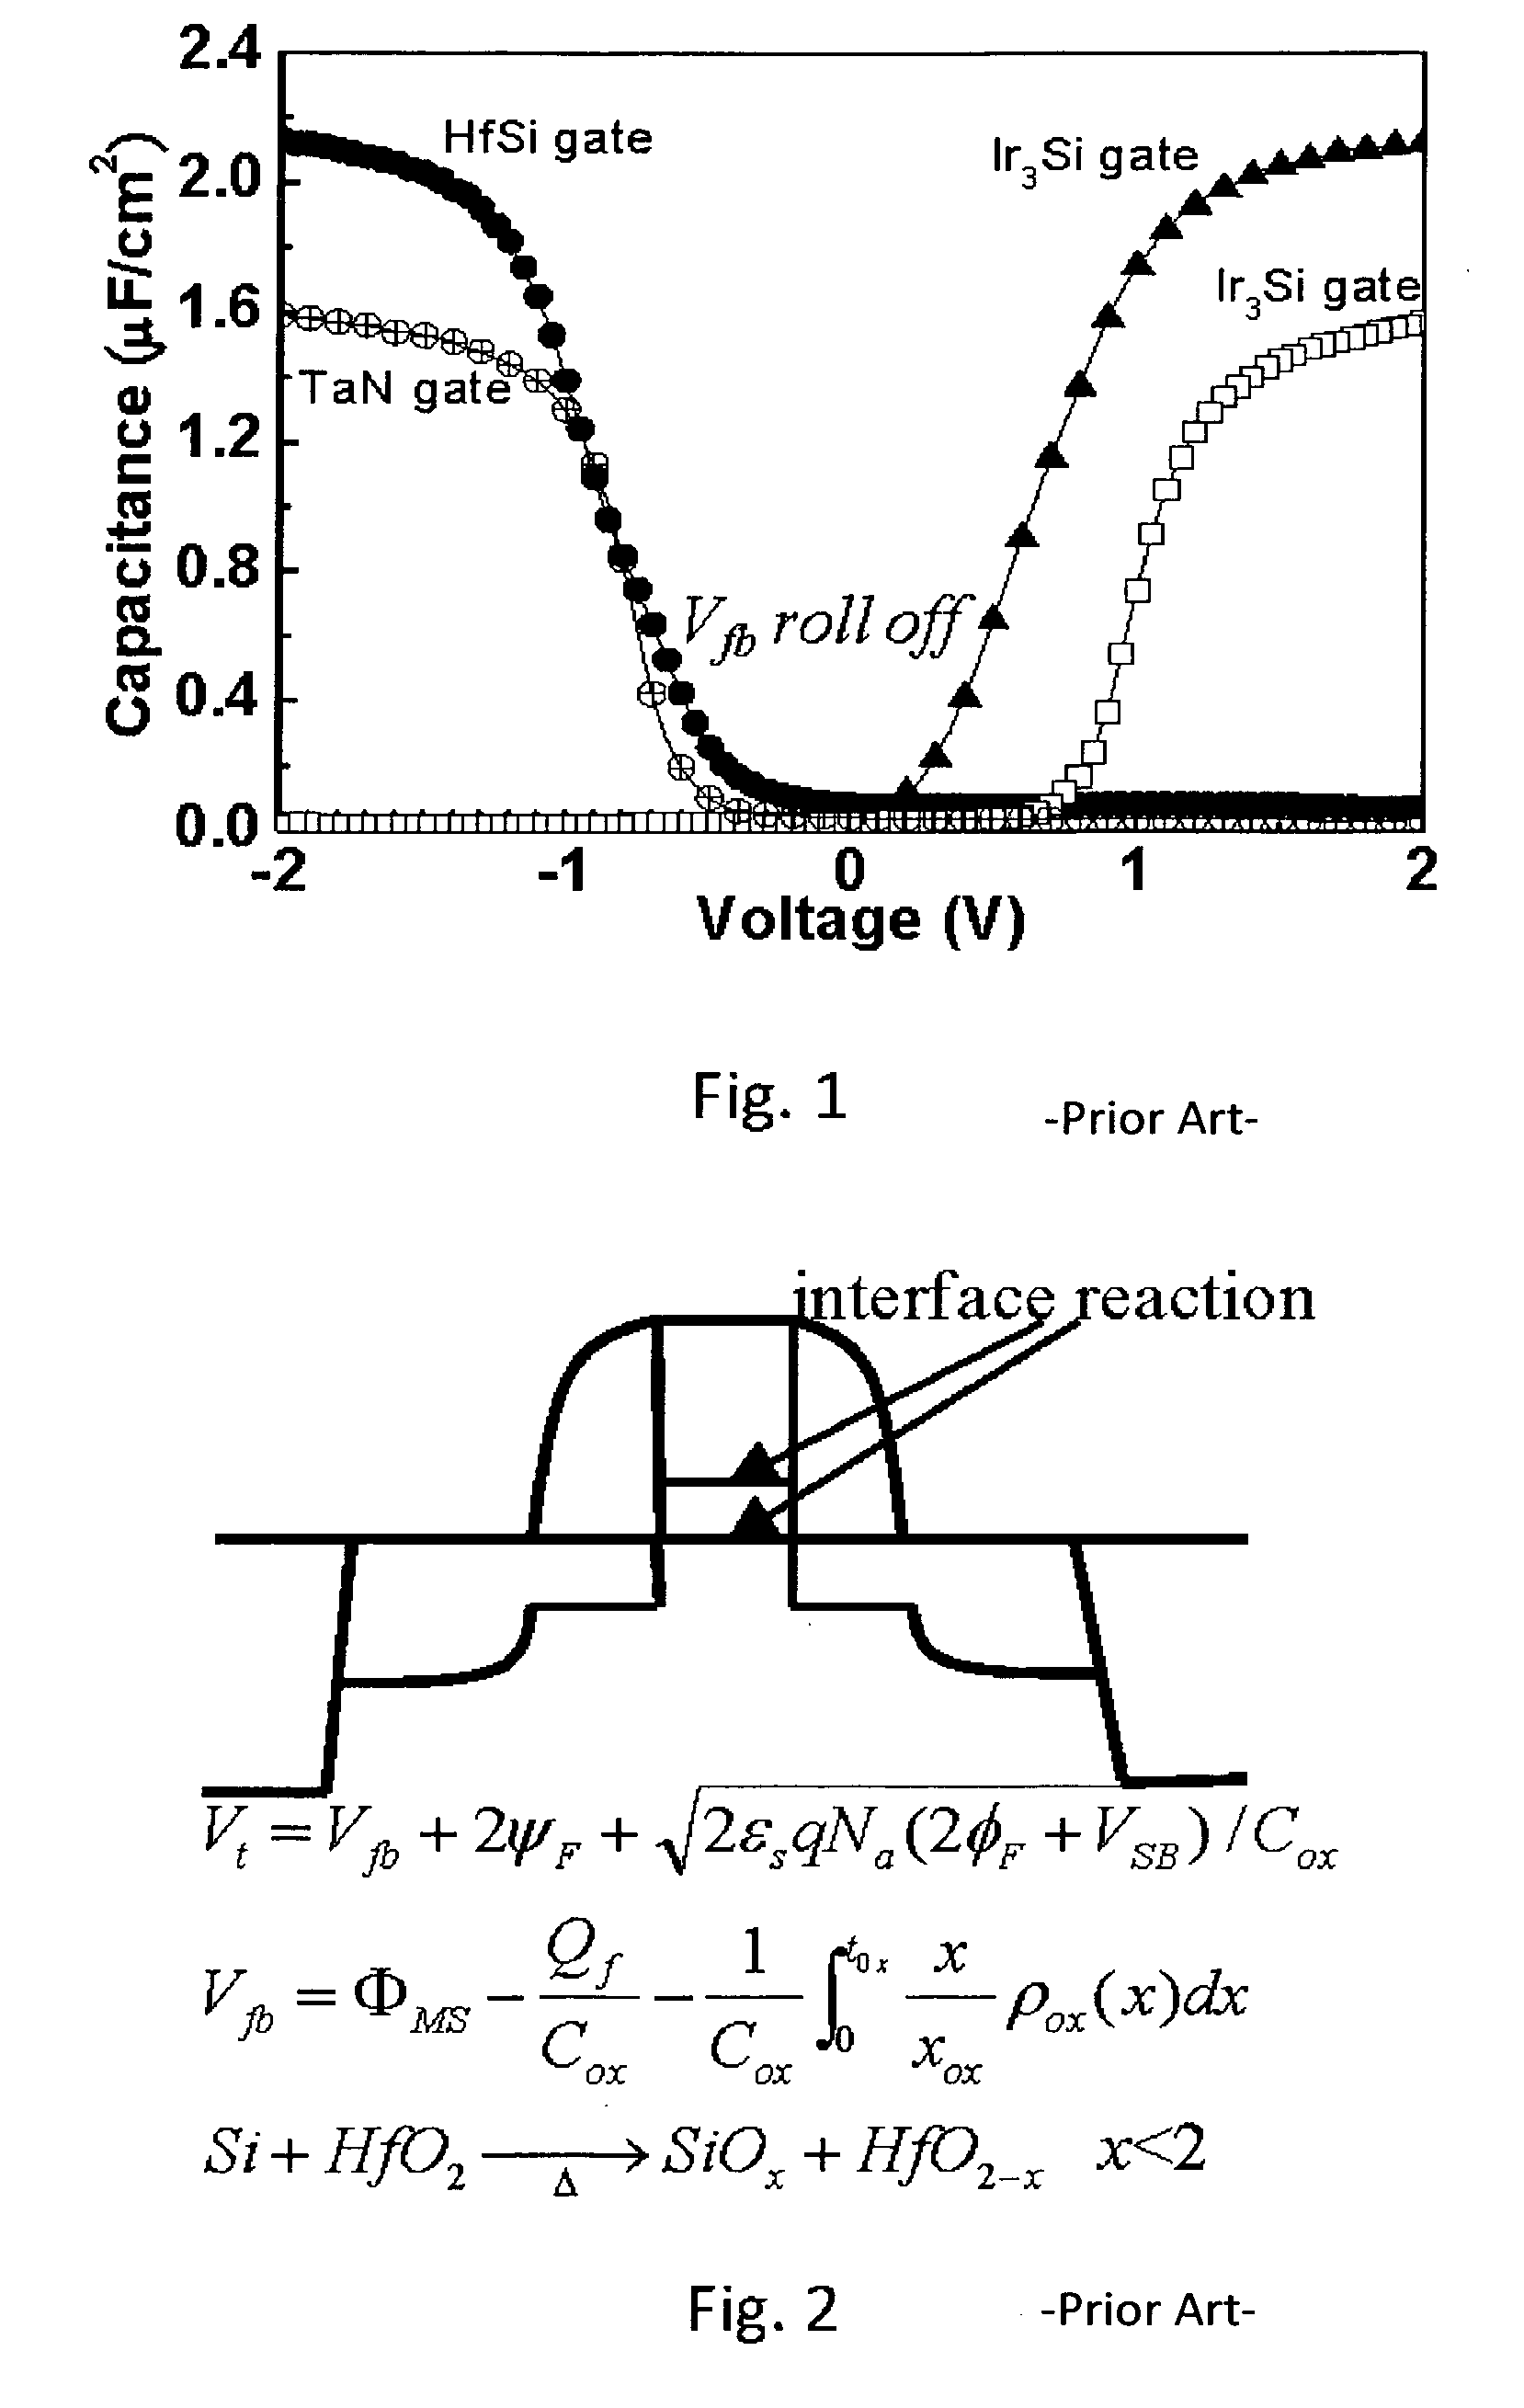 Method for making very low Vt metal-gate/high-k CMOSFETs using self-aligned low temperature shallow junctions